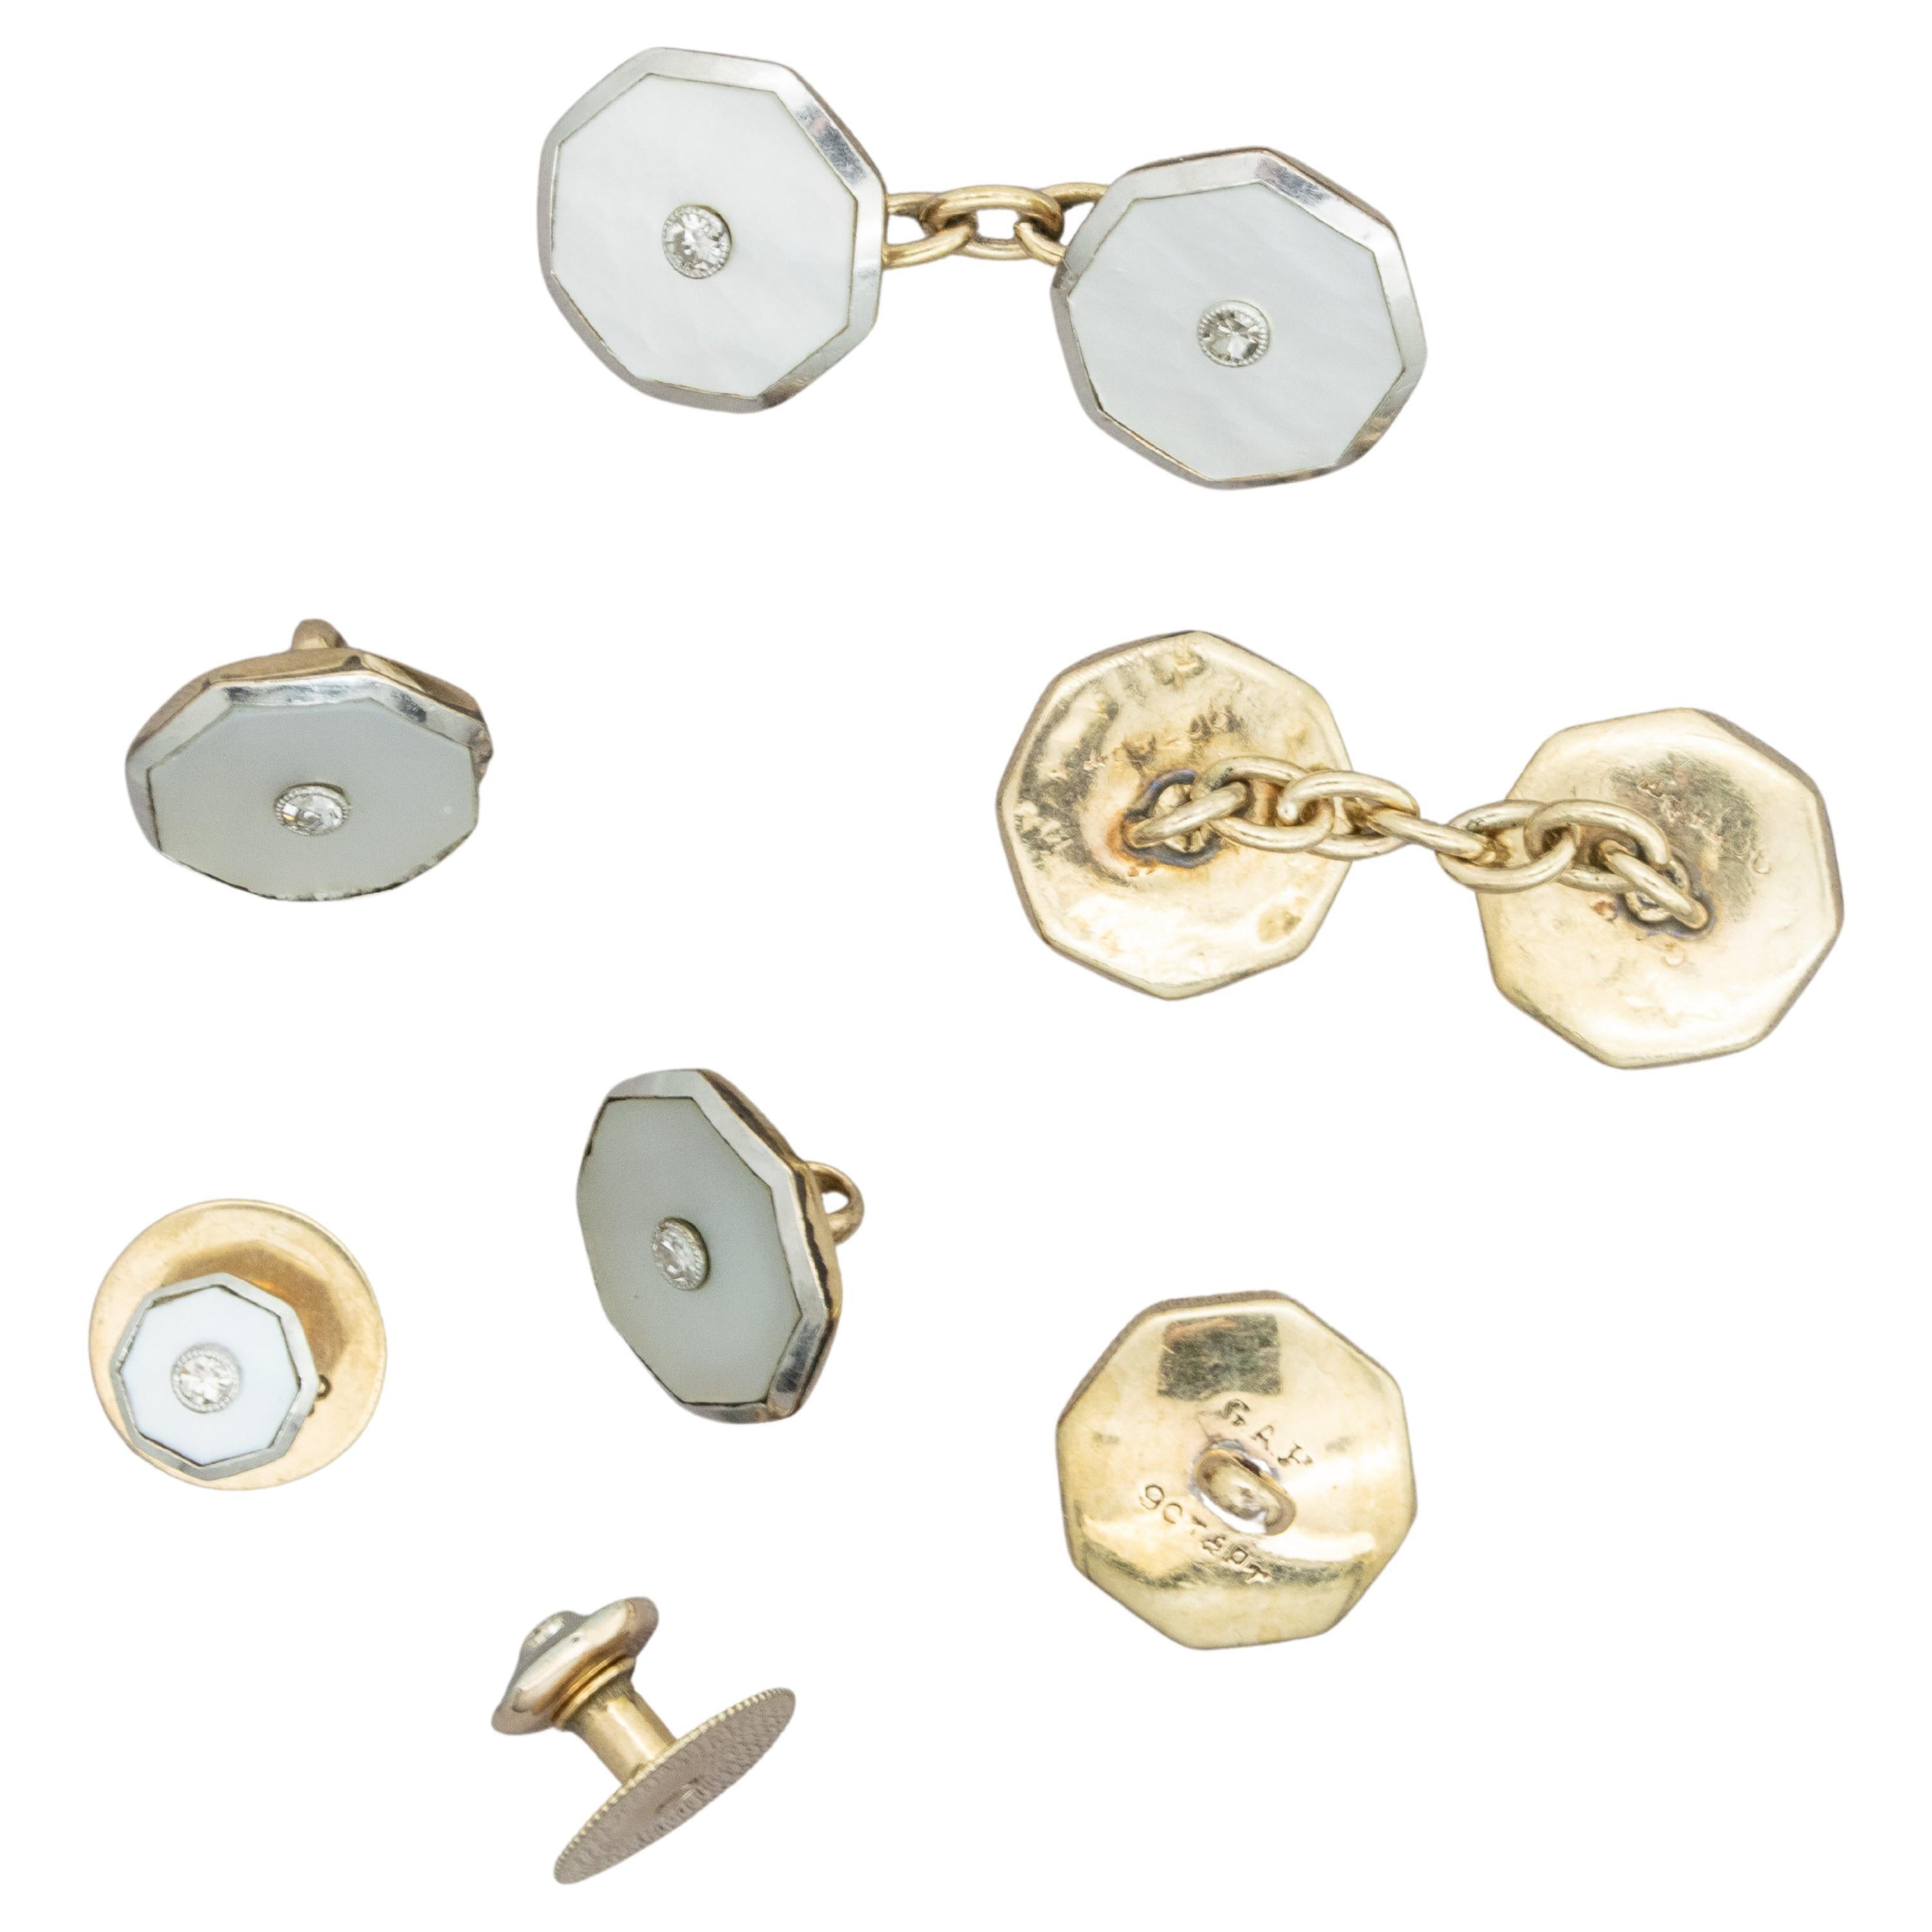 Full Set (7 pieces) 9ct Yellow gold Art Deco accessories for Tuxedo Dress Shirt, 
all in Octagonal design with Mother of Pearl surrounding the small 3 point Diamond set in the middle in Platinum
Comprising :
2 Double sided cufflinks with a chain,